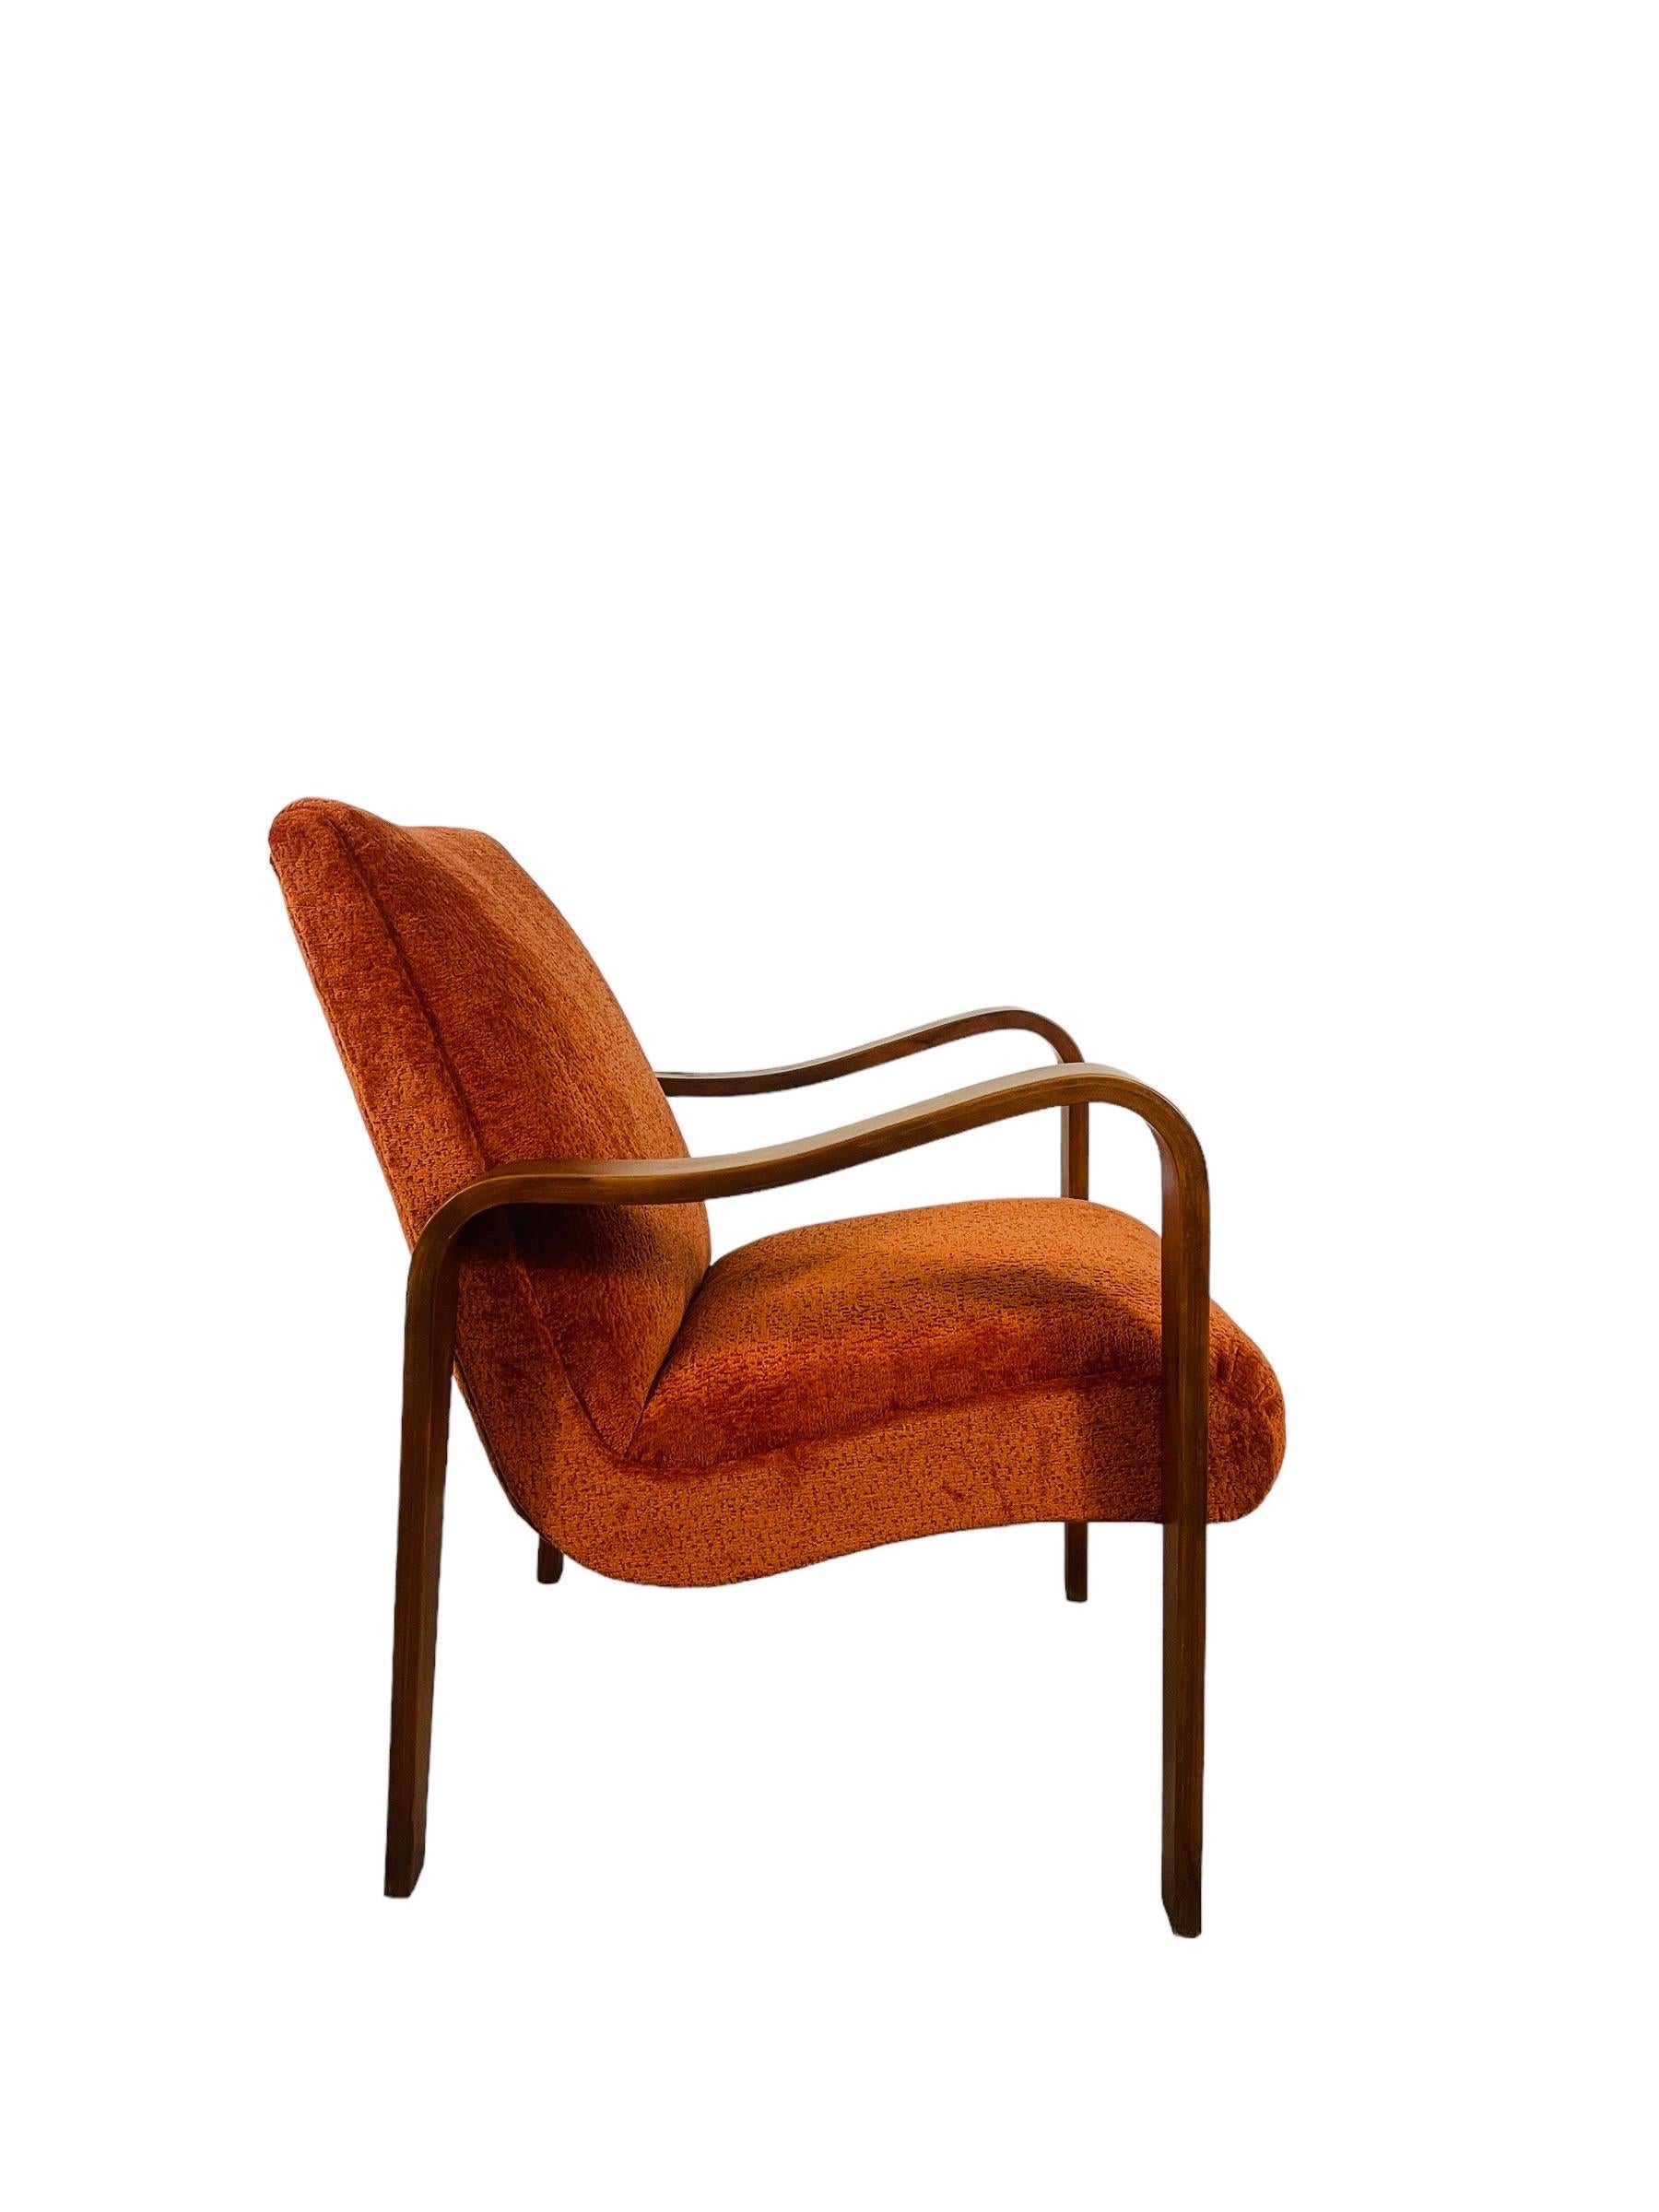 Dive into the vibrant embrace of our reimagined Thonet lounge chair, now dressed in a sumptuous burnt orange fabric that's as inviting as a warm sunset. This Mid Century Modern icon has been lovingly reupholstered to bring a fresh pop of color and